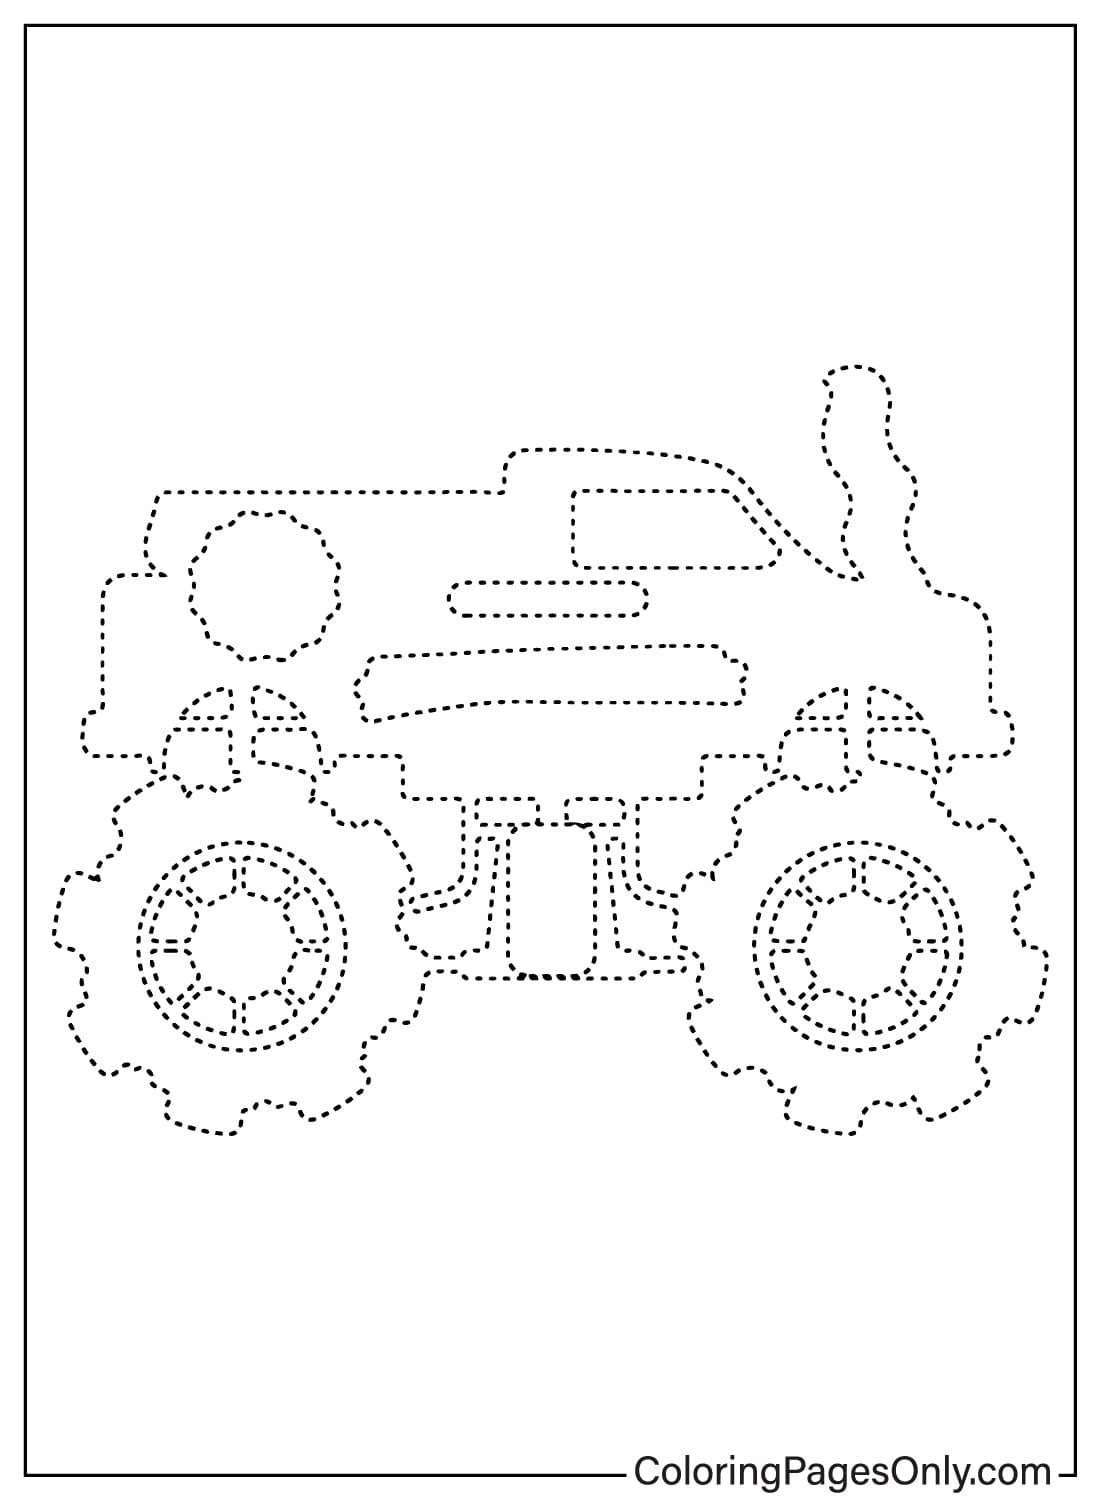 Tracing Coloring Sheet for Kids from Tracing